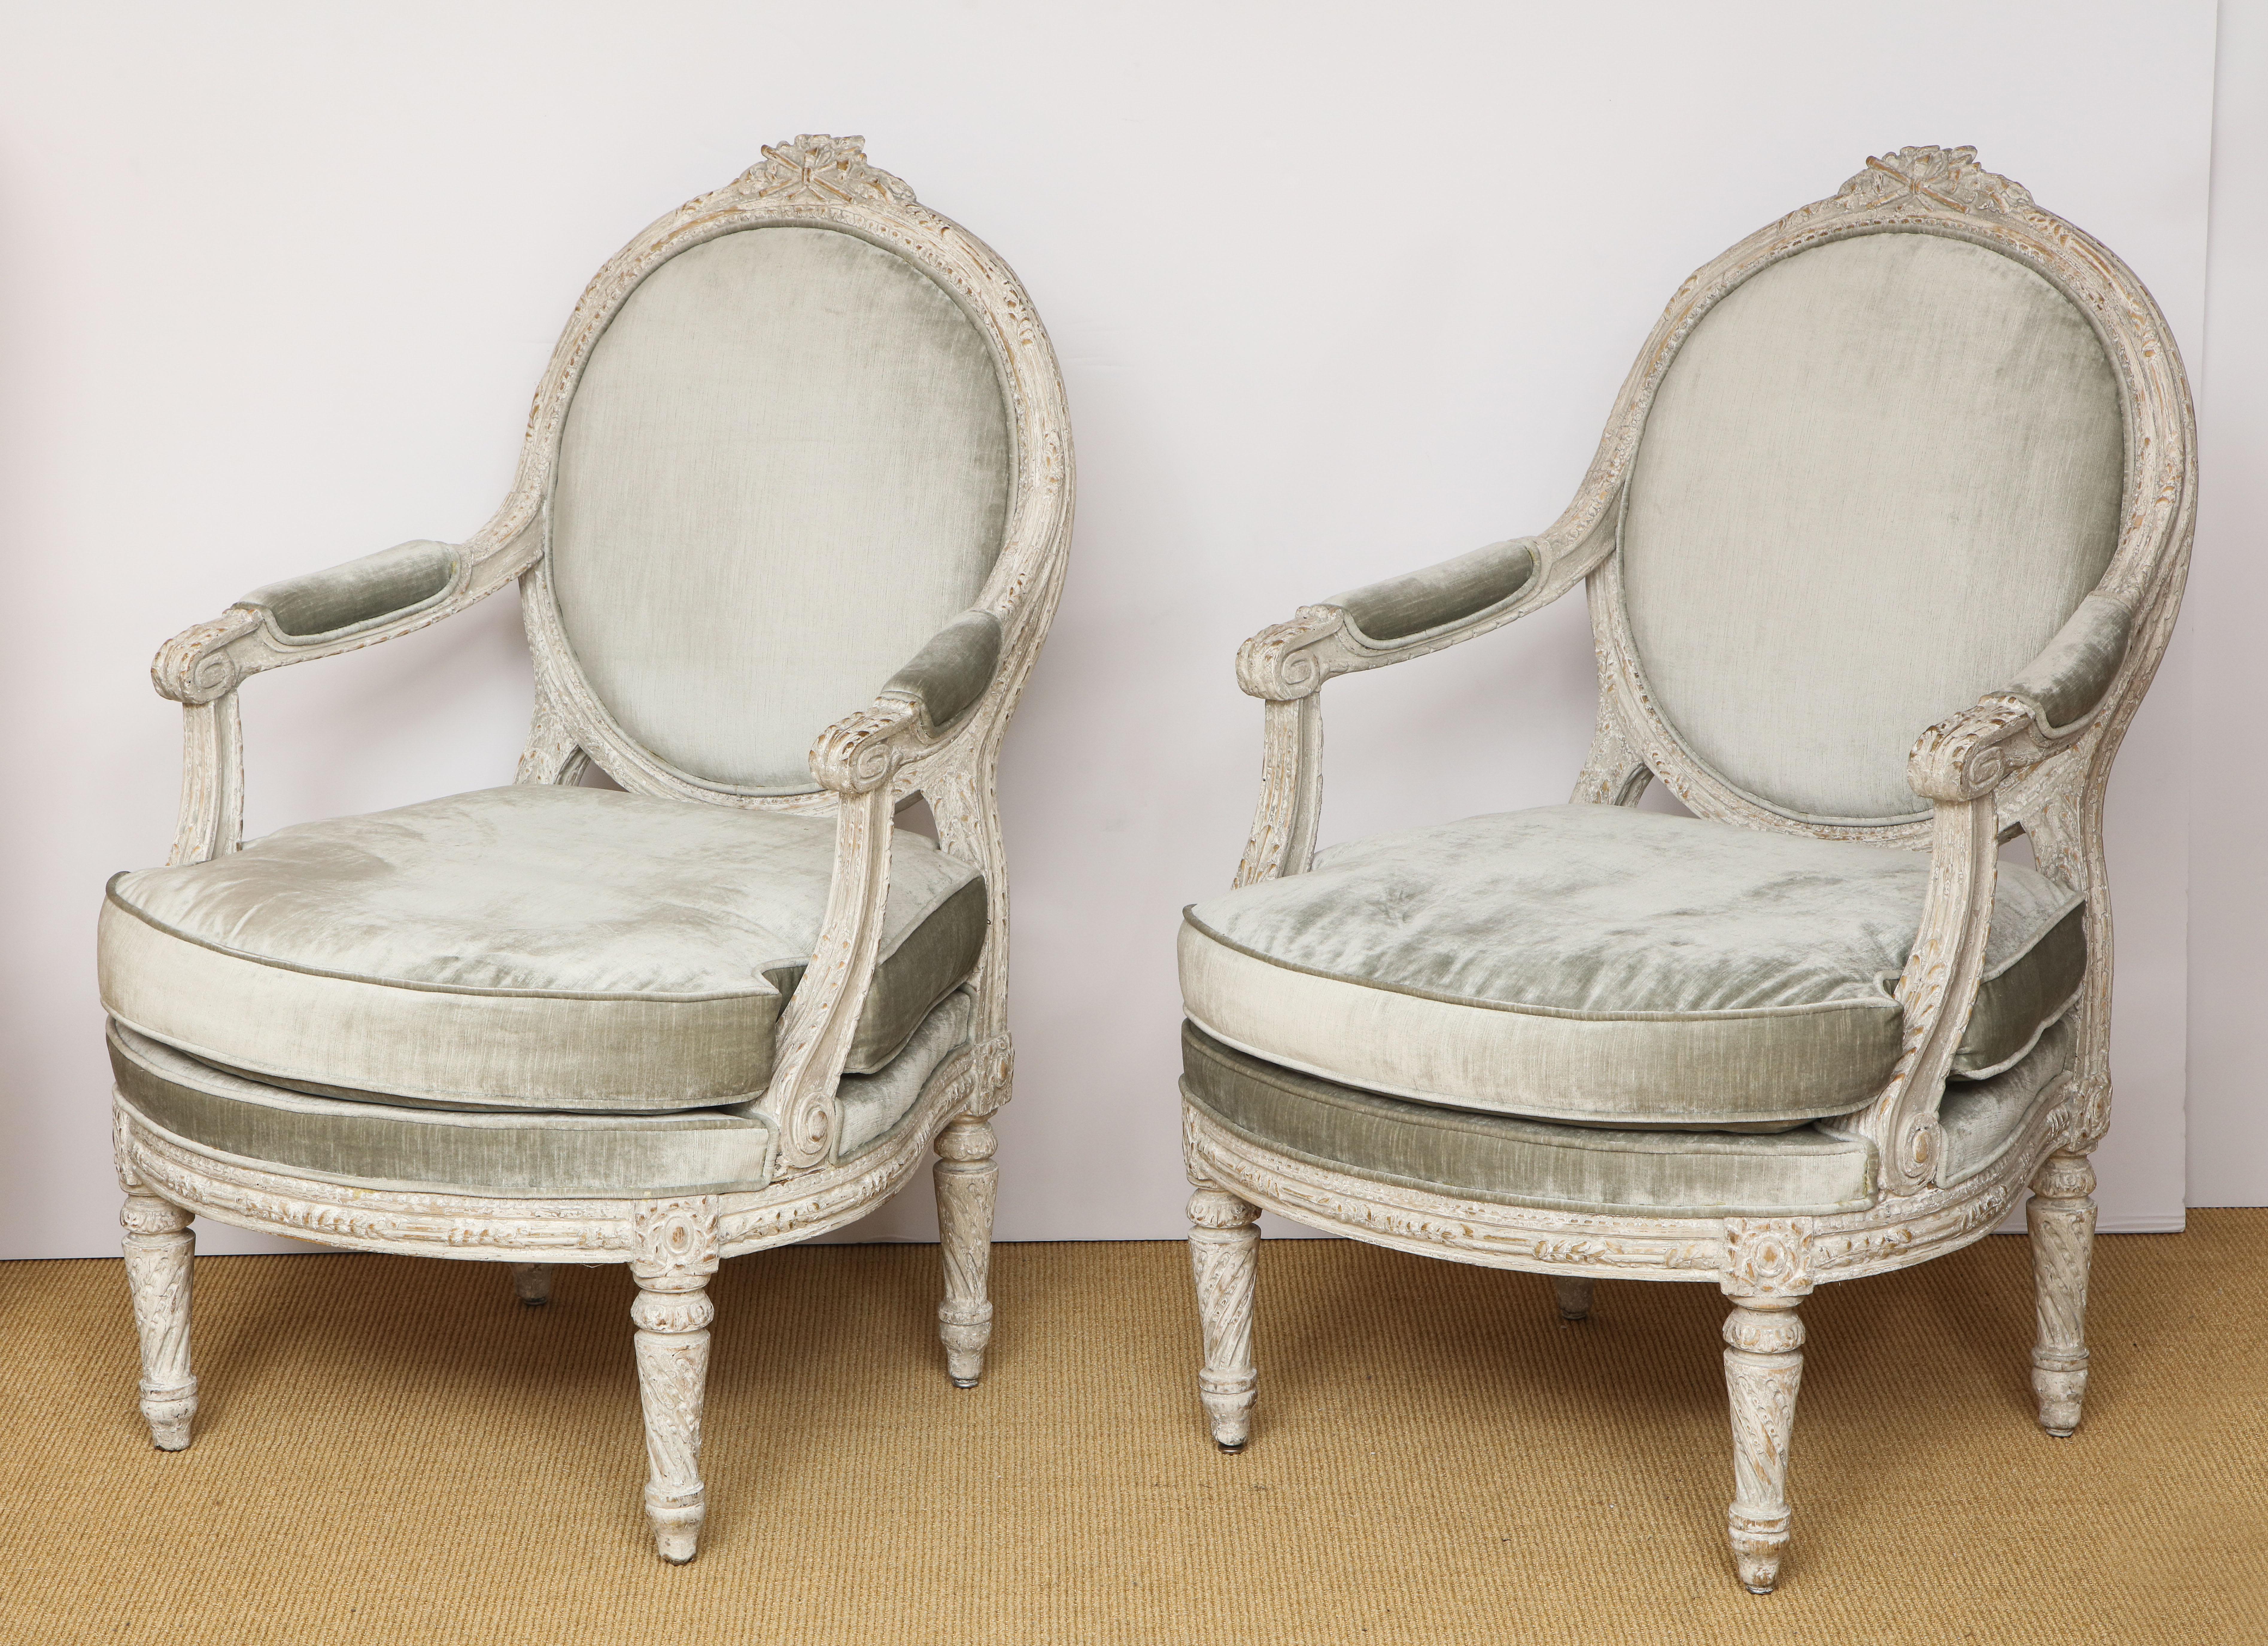 The pair of chairs from the Piedmont region of Italy. Having a rounded back with a carved floral crest, the frame carved with wheat and the legs having a twisted fluting.

Paint refreshed at a later date.